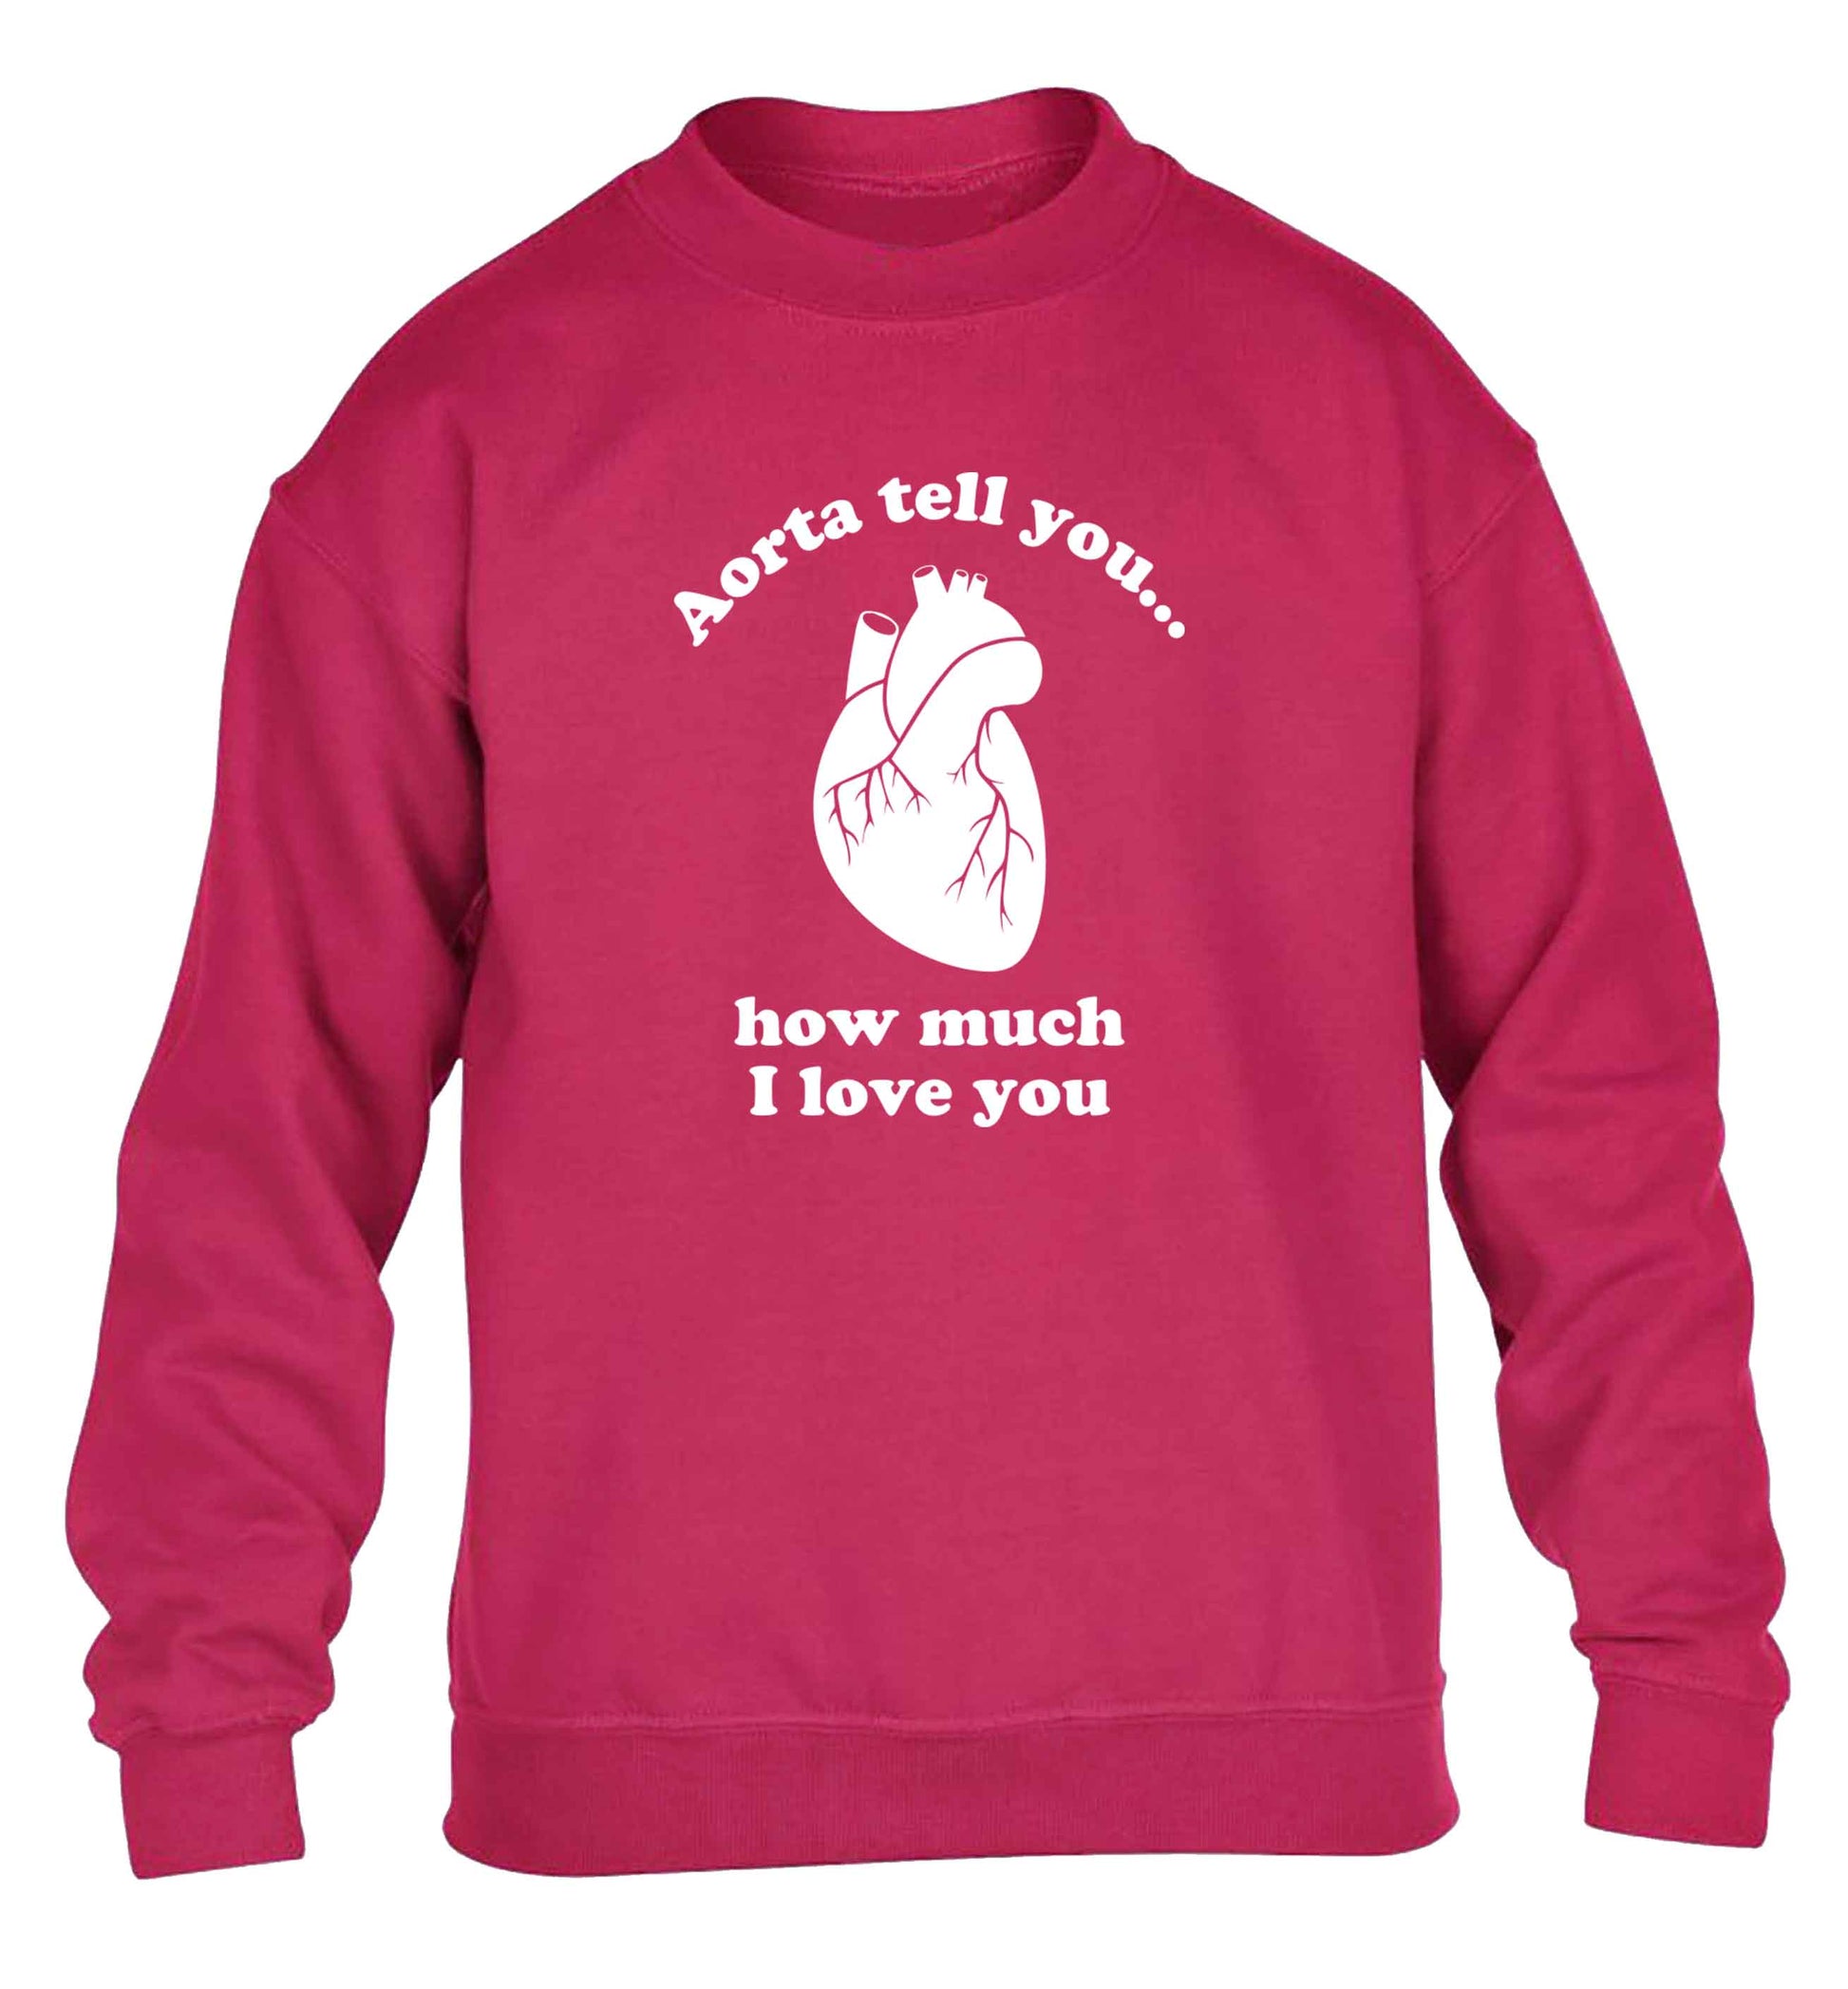 Aorta tell you how much I love you children's pink sweater 12-13 Years